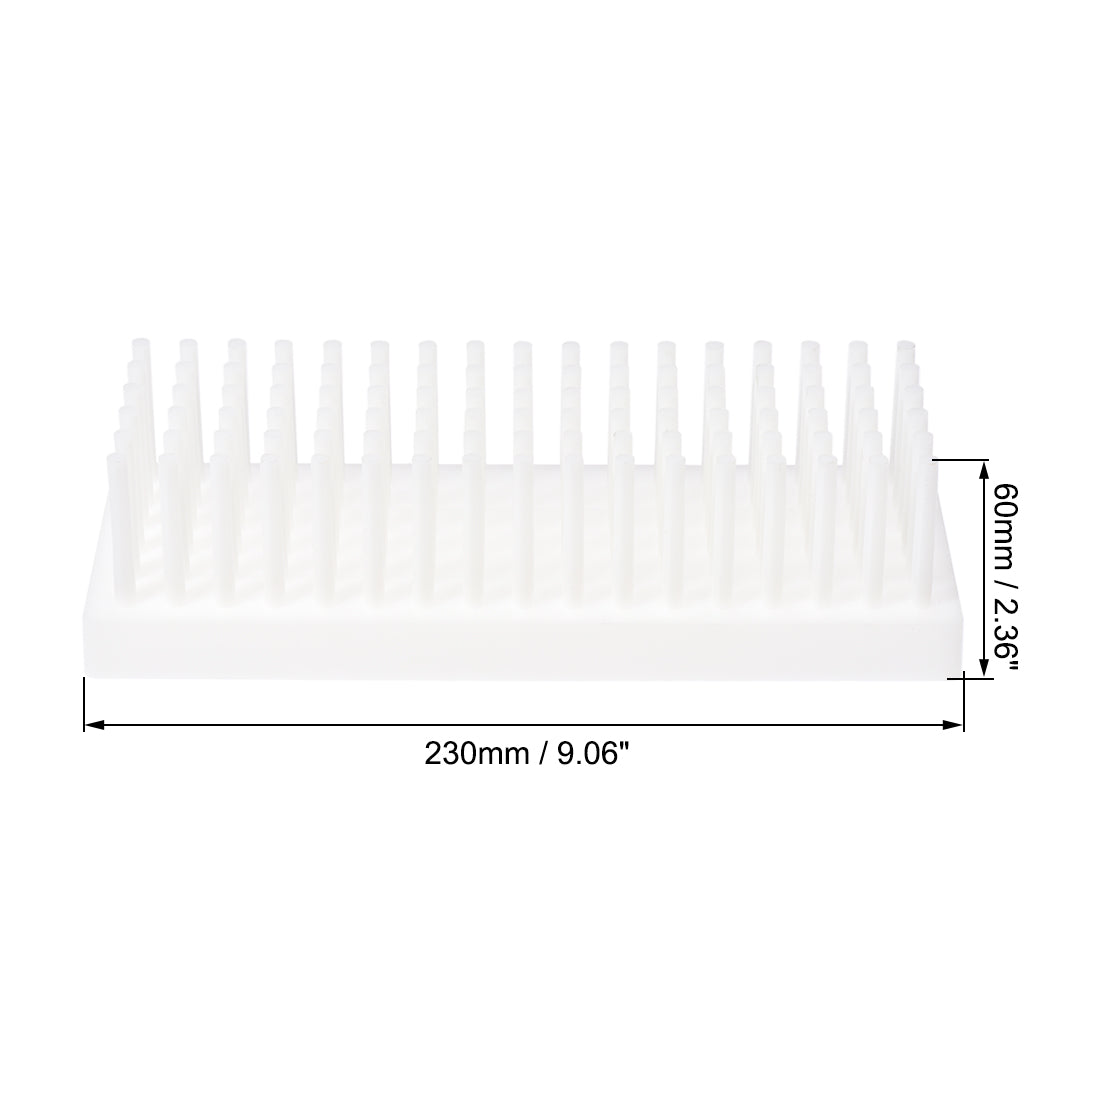 Uxcell Uxcell Polypropylene Test Tube Stand Holder Rack 102 Wells for 10-13mm Tubes White